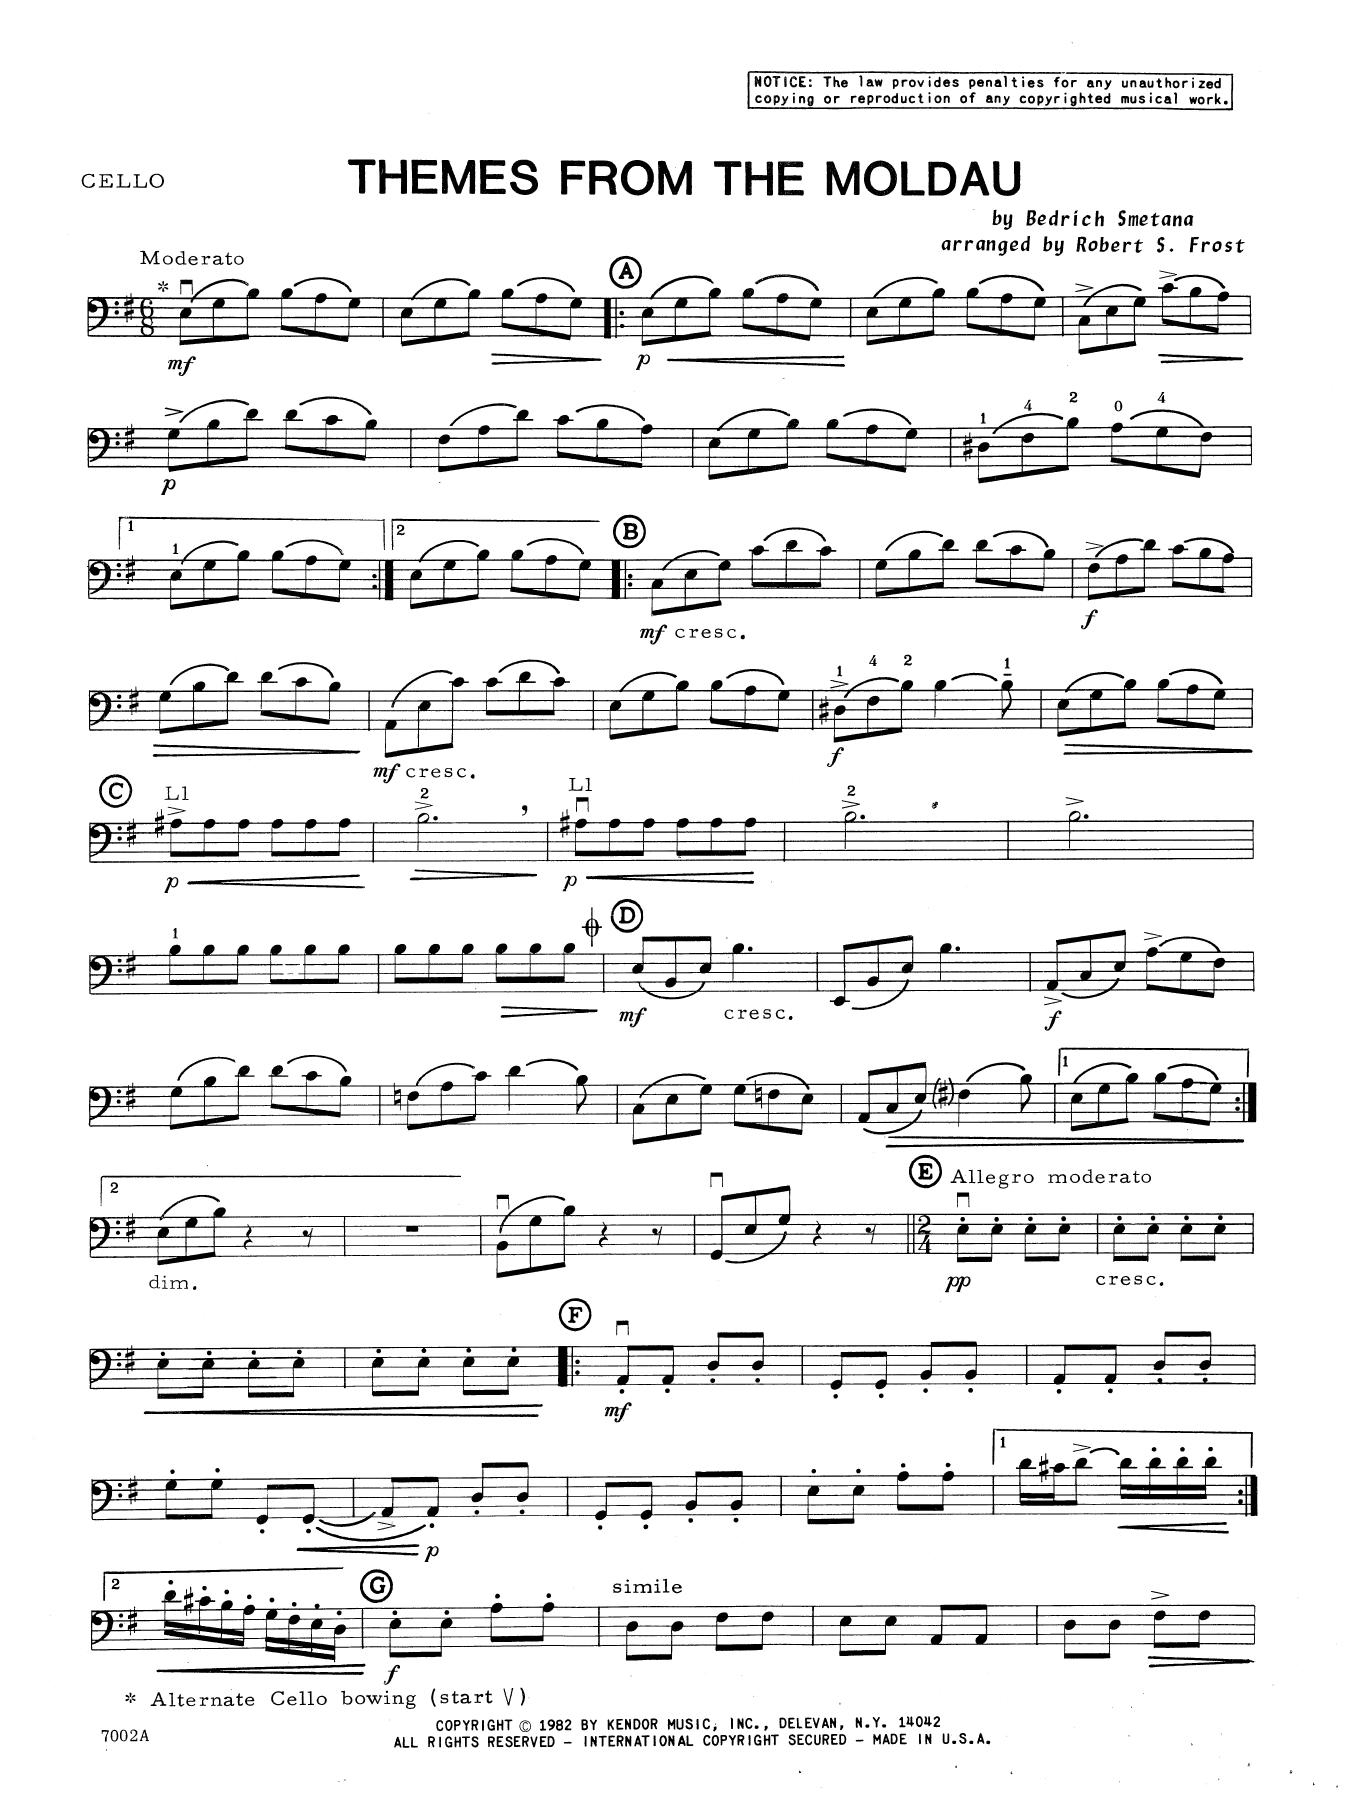 Download Robert S. Frost Themes From The Moldau - Cello Sheet Music